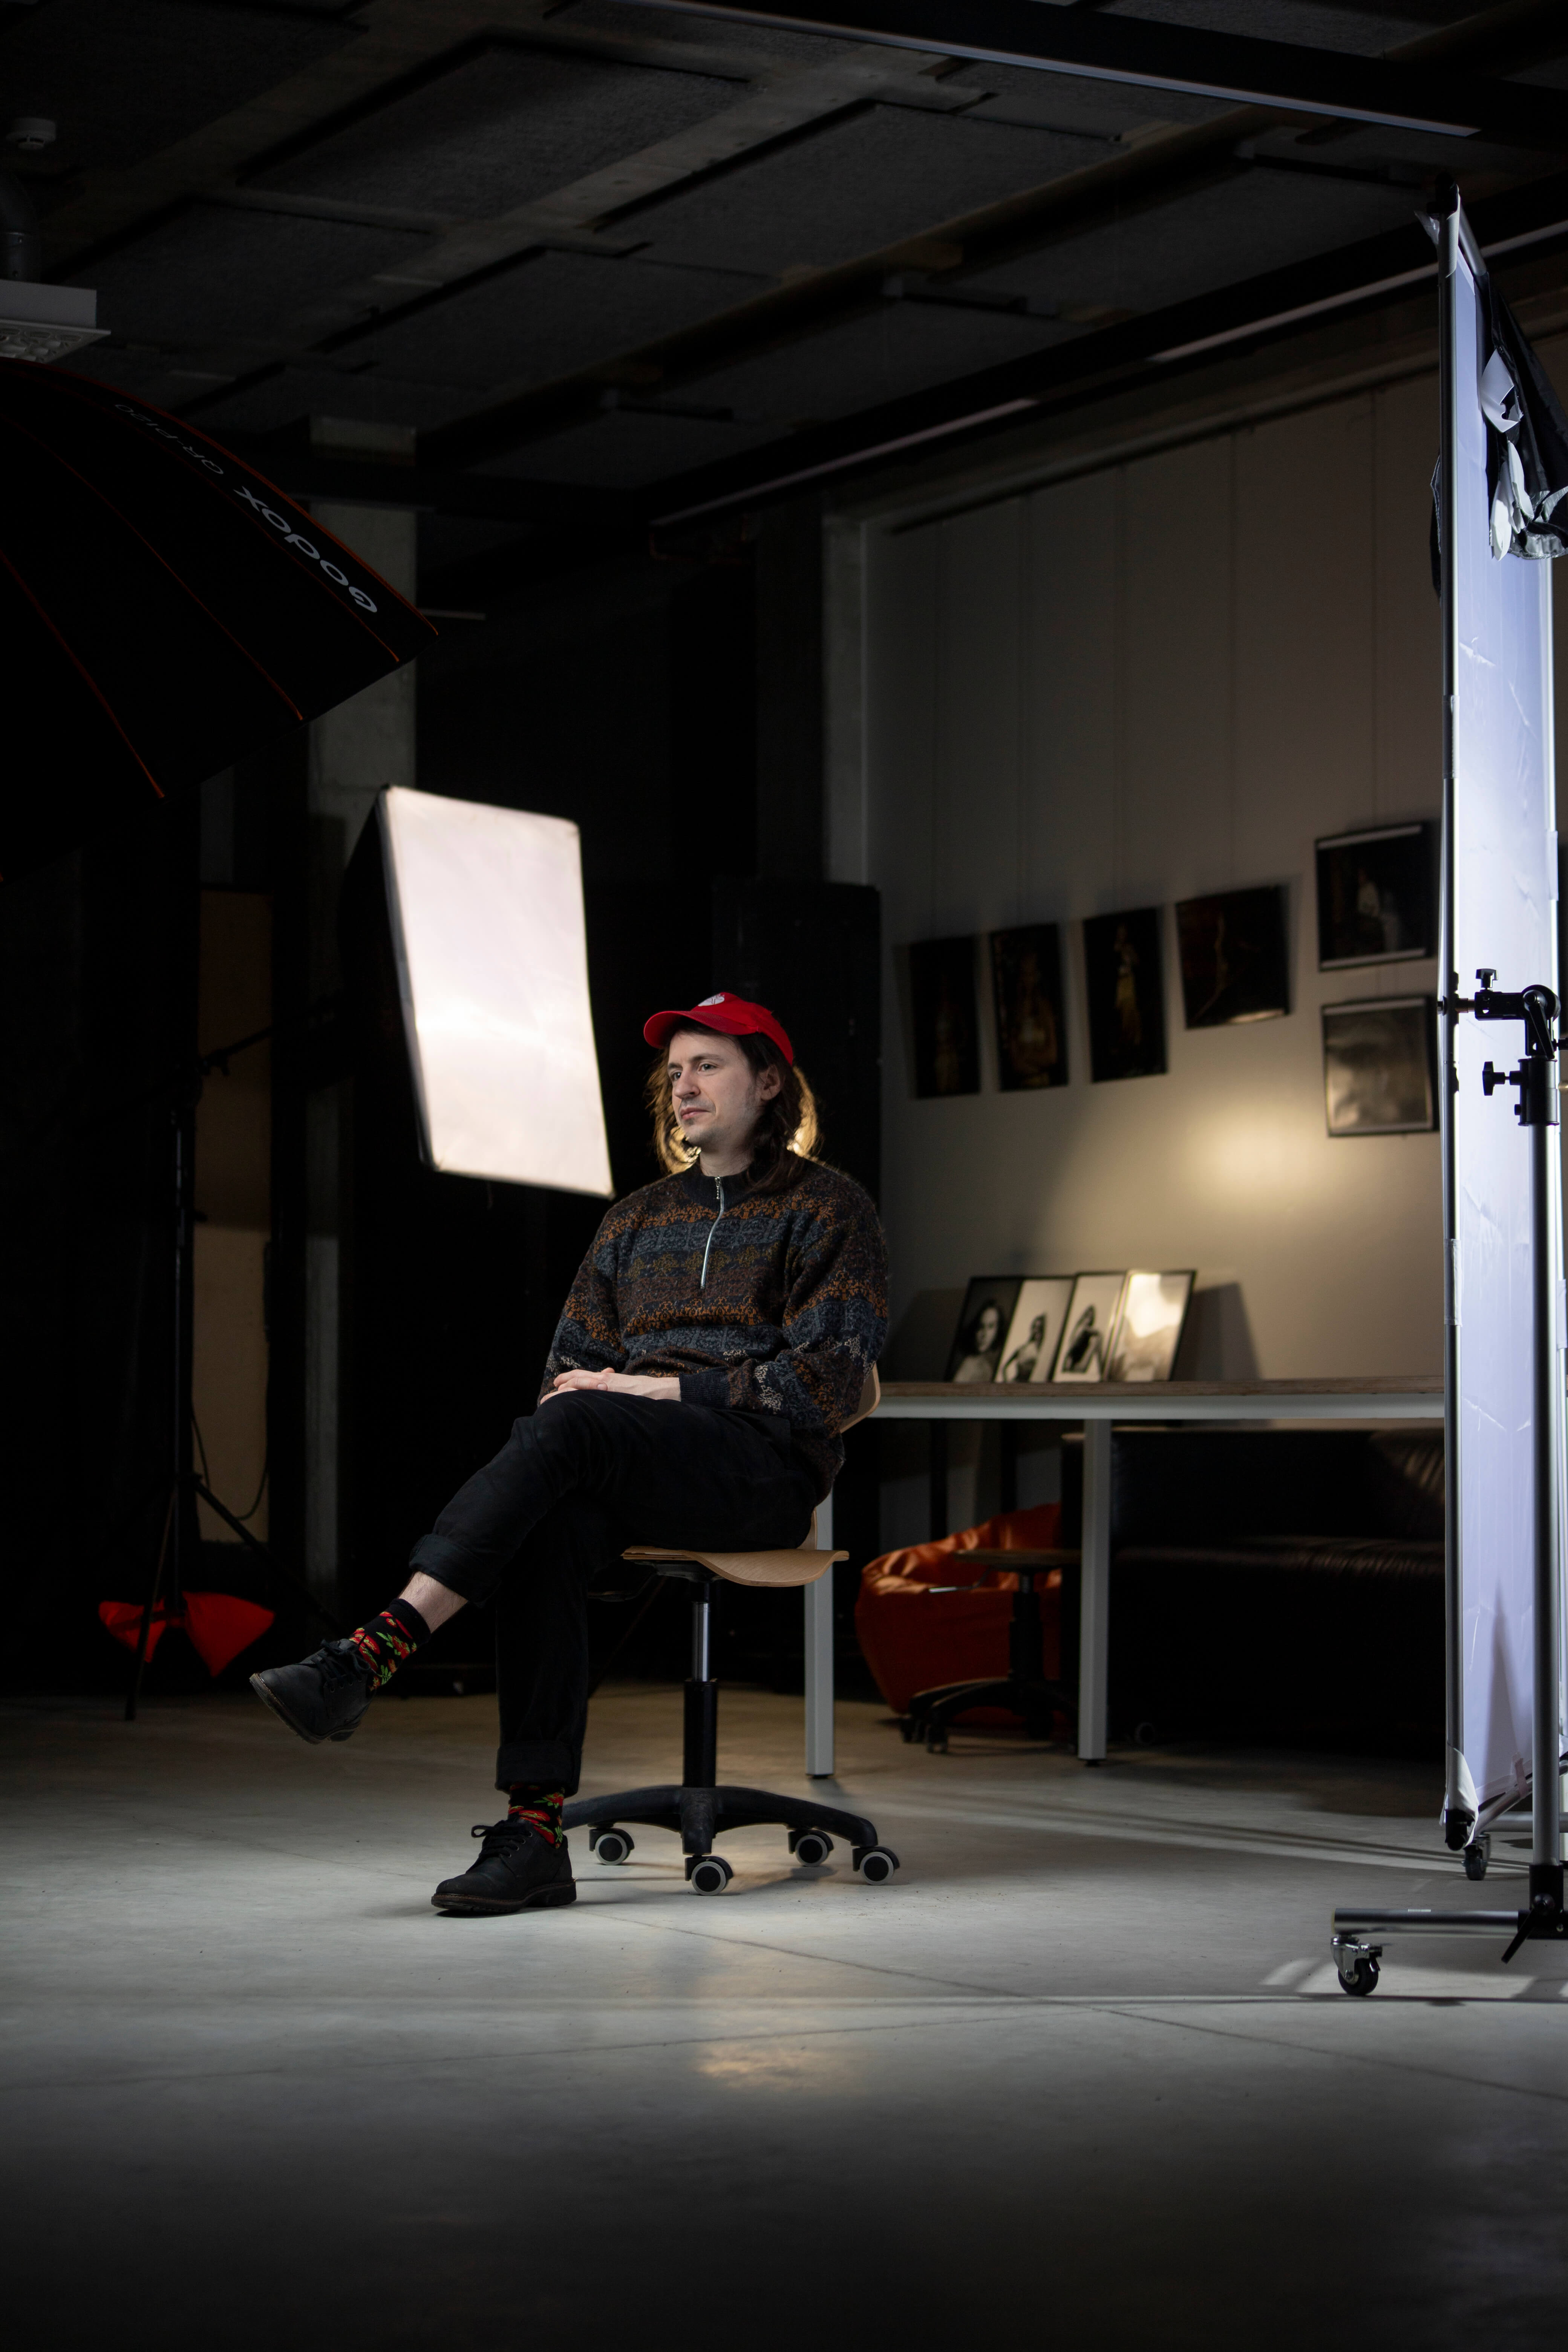 Jānis Jankevics sits on a swivel chair, looking to the left of the frame in a room set up for photography. He wears a red baseball cap, a zip up sweater, dark trousers and dark shoes.